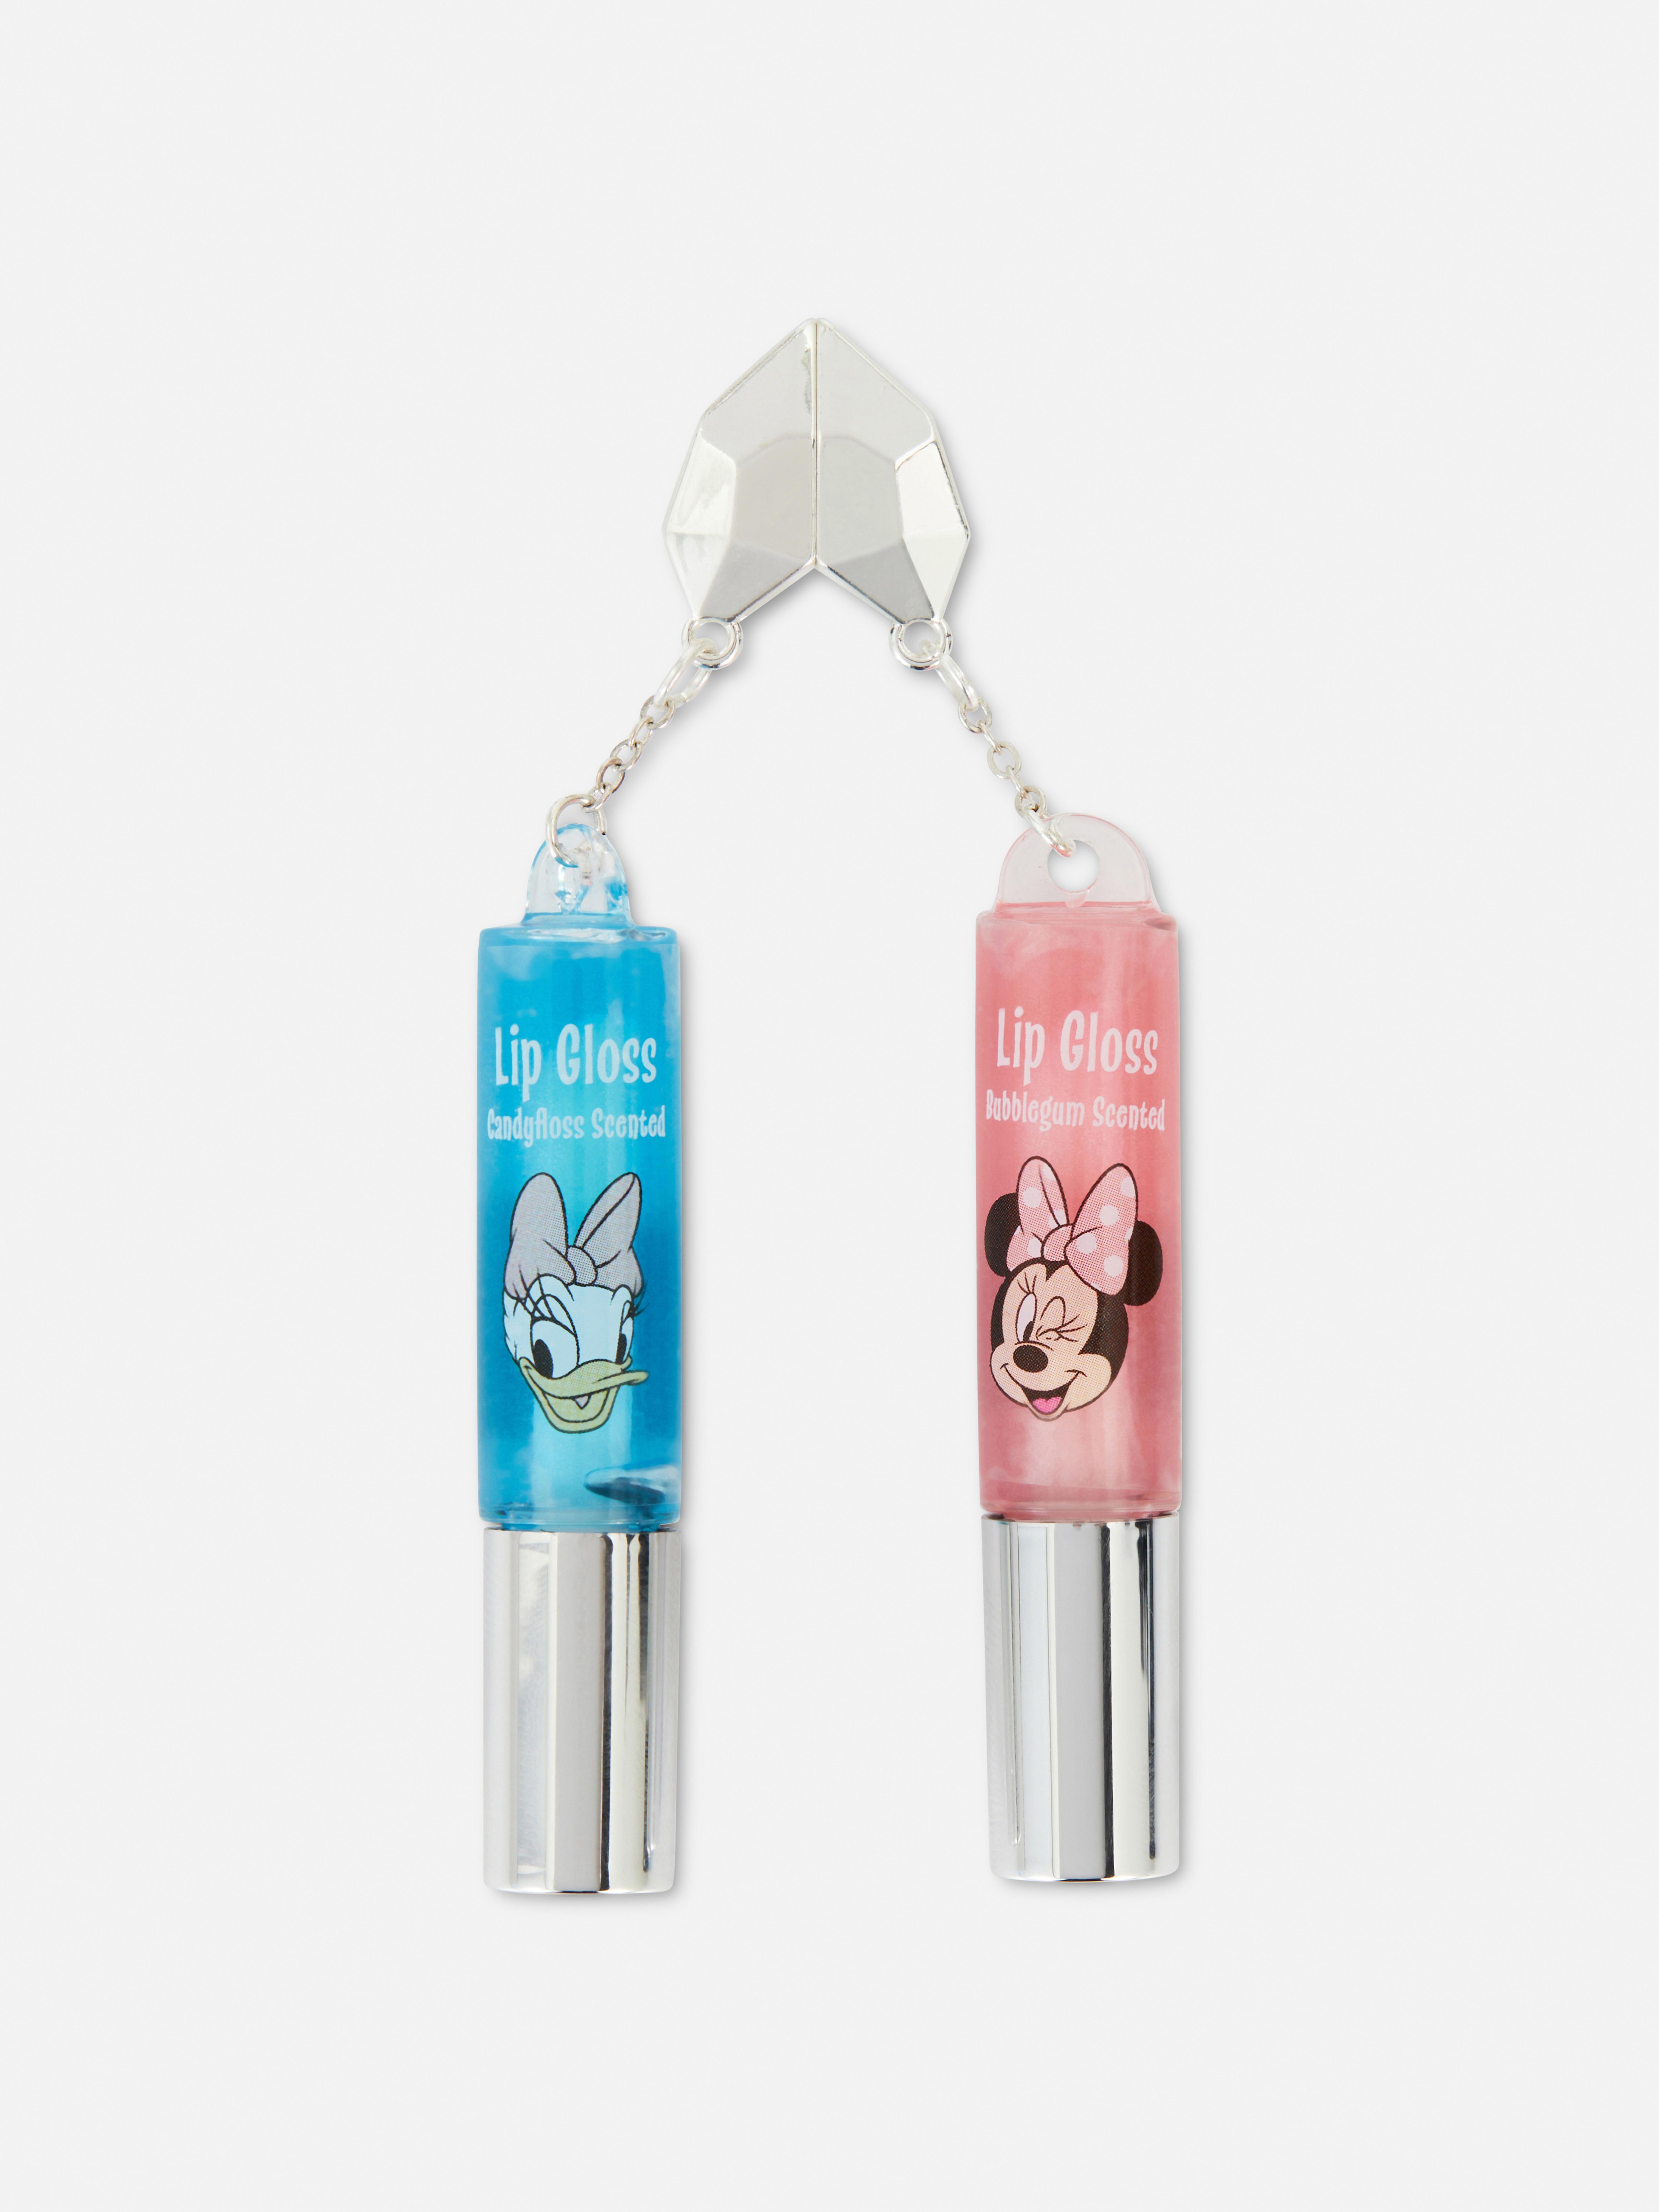 Disney’s Minnie Mouse and Daisy Duck Lip Gloss Duo